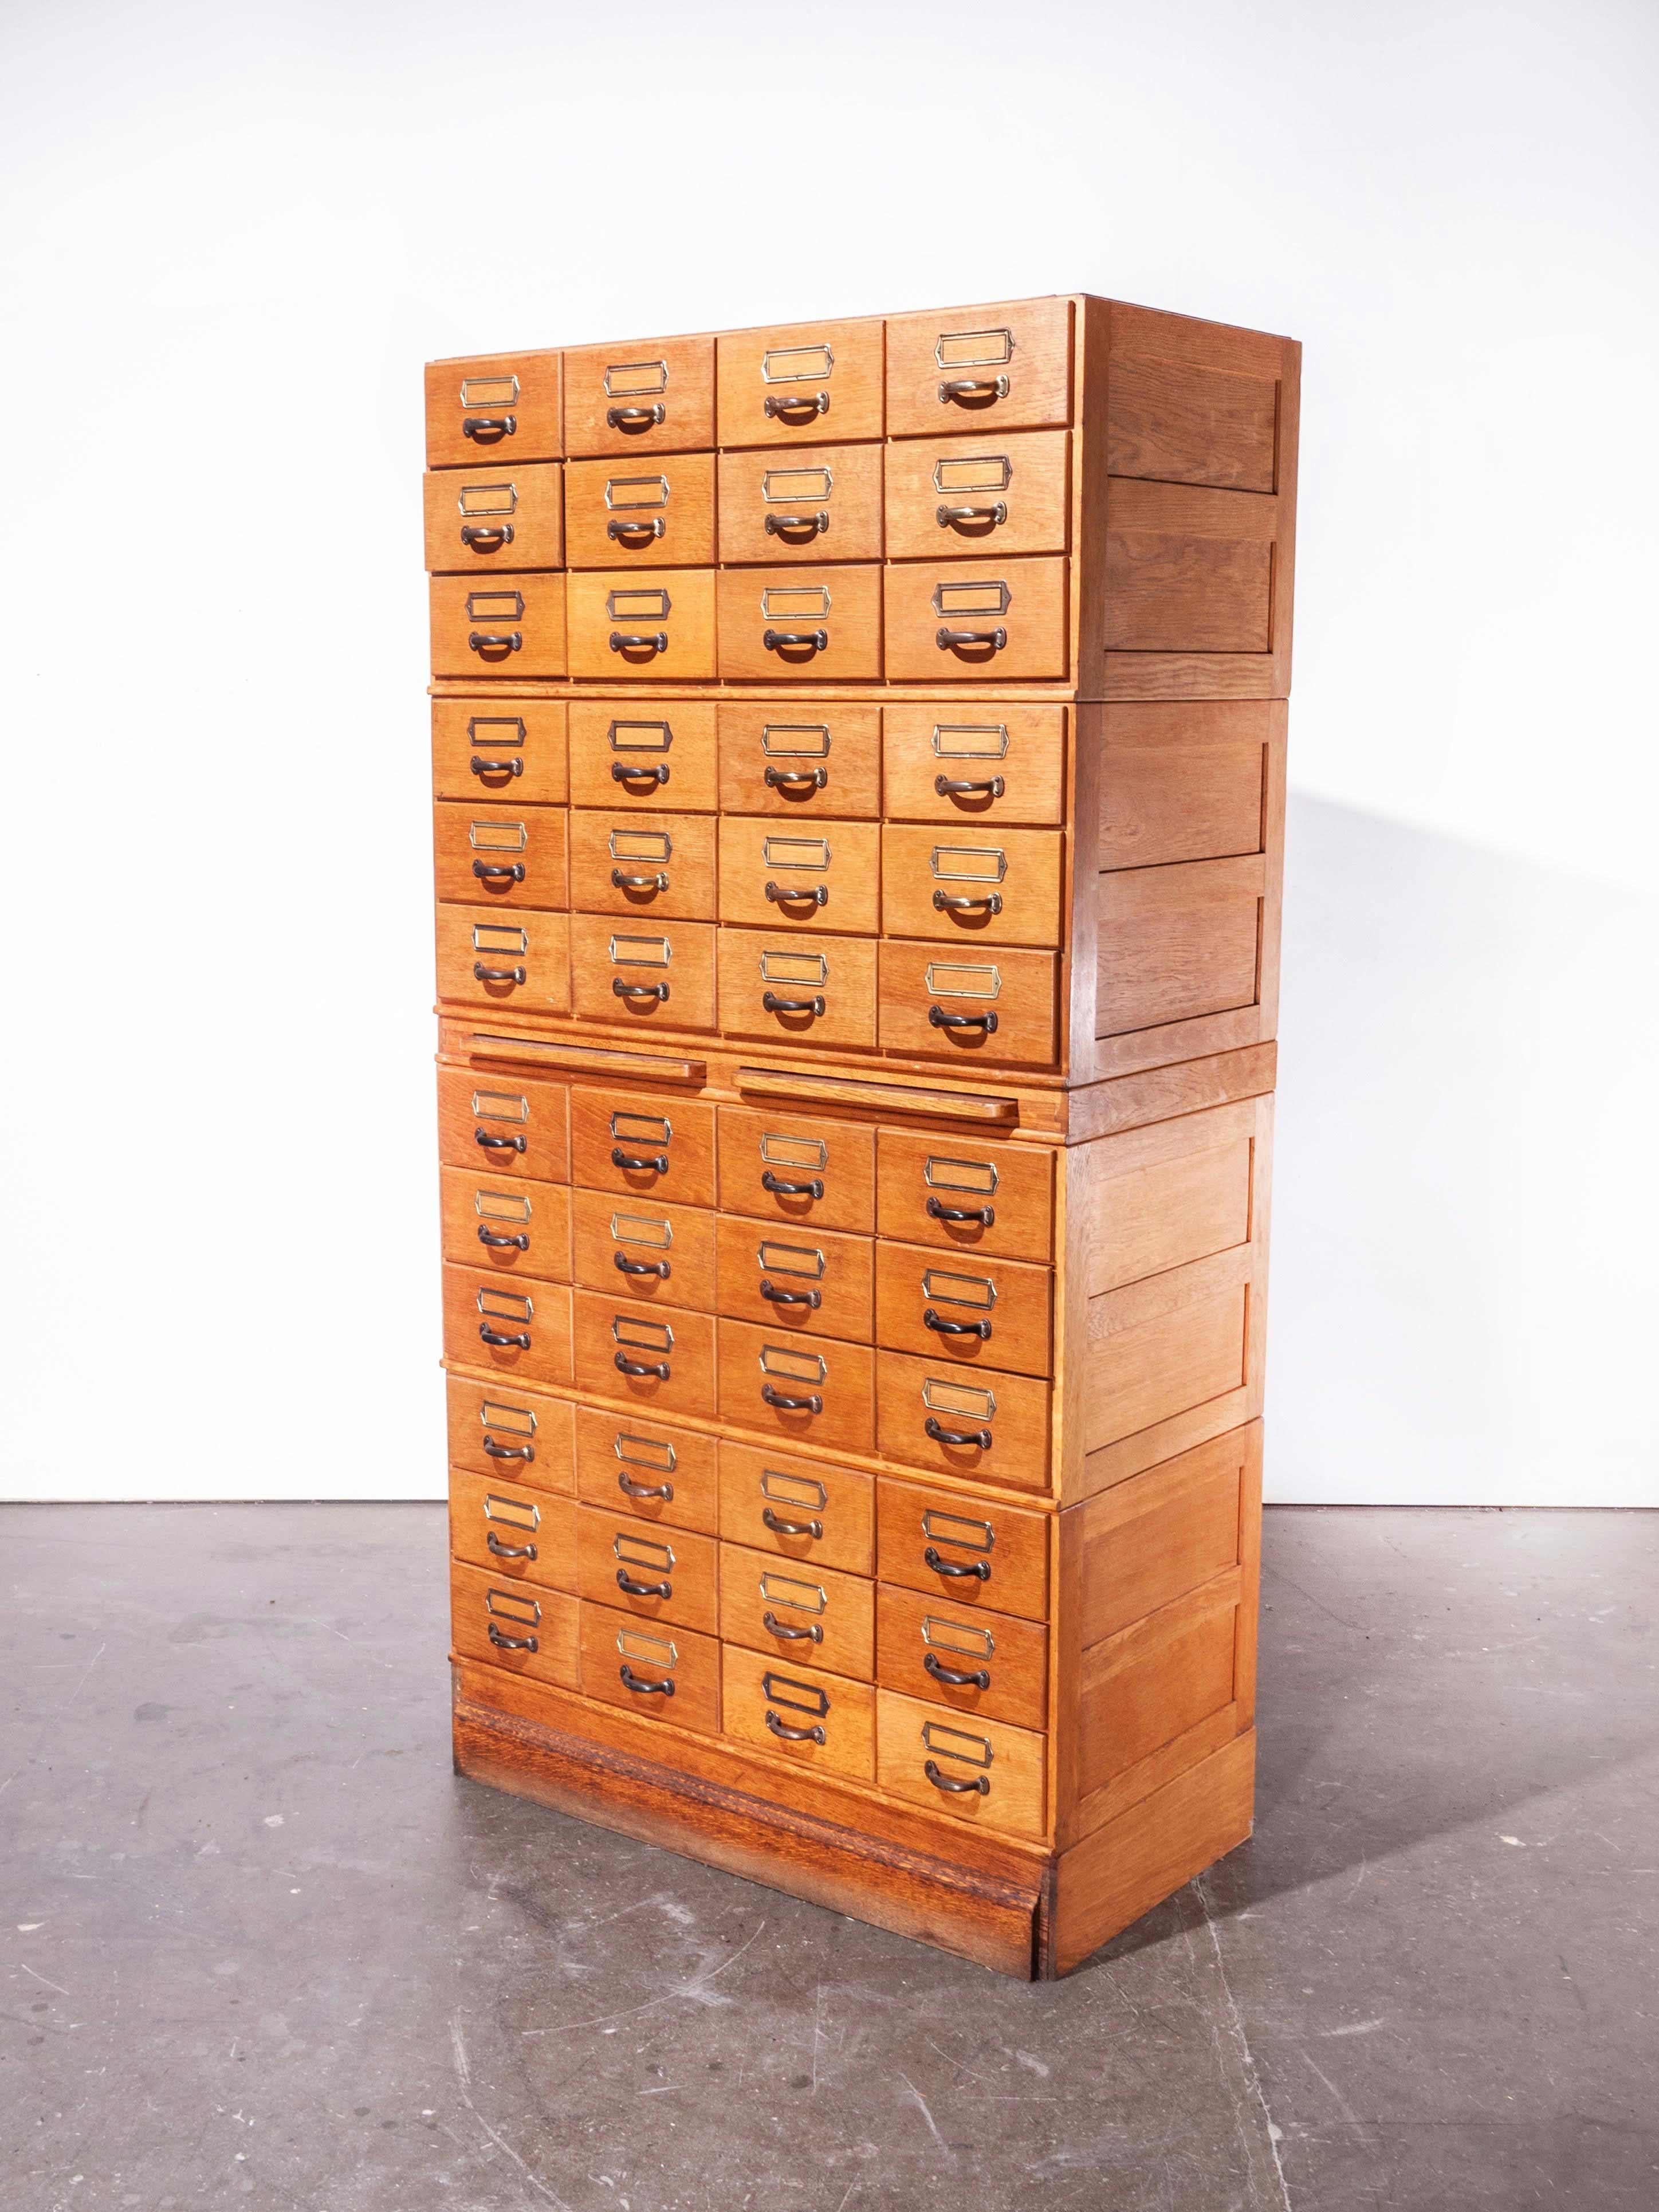 1950s oak tall multi drawer chest of drawers, storage cabinet, filing
1950s tall multi drawer chest of drawers, storage cabinet. With forty eight drawers and two sliding pullout / pull-out shelves this is a stunning practical chest. Sourced from a